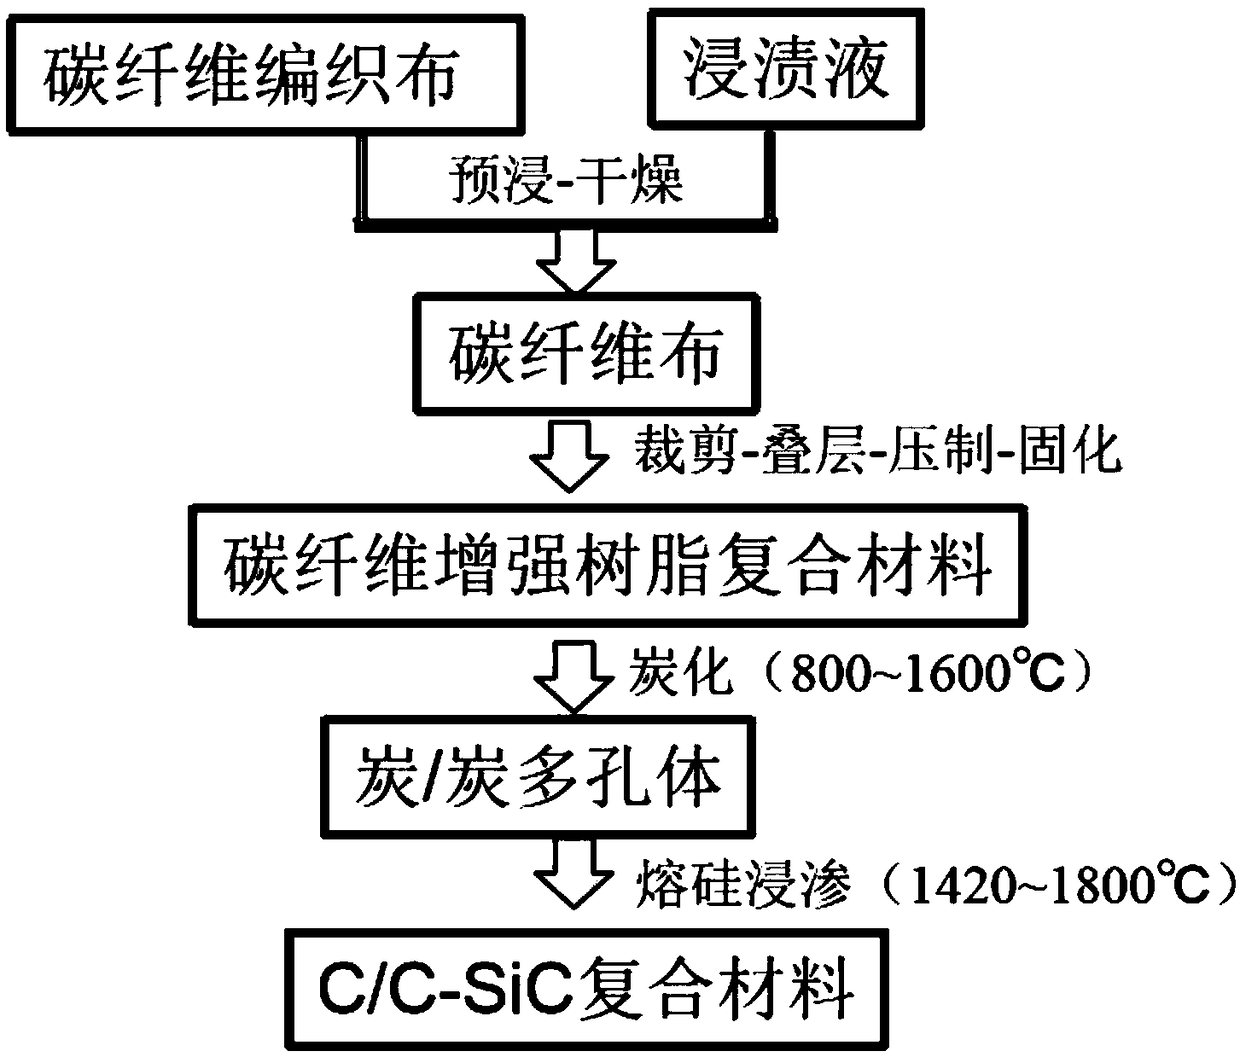 High-damage tolerance C/C-SiC composite material as well as preparation method and regulation and control method thereof